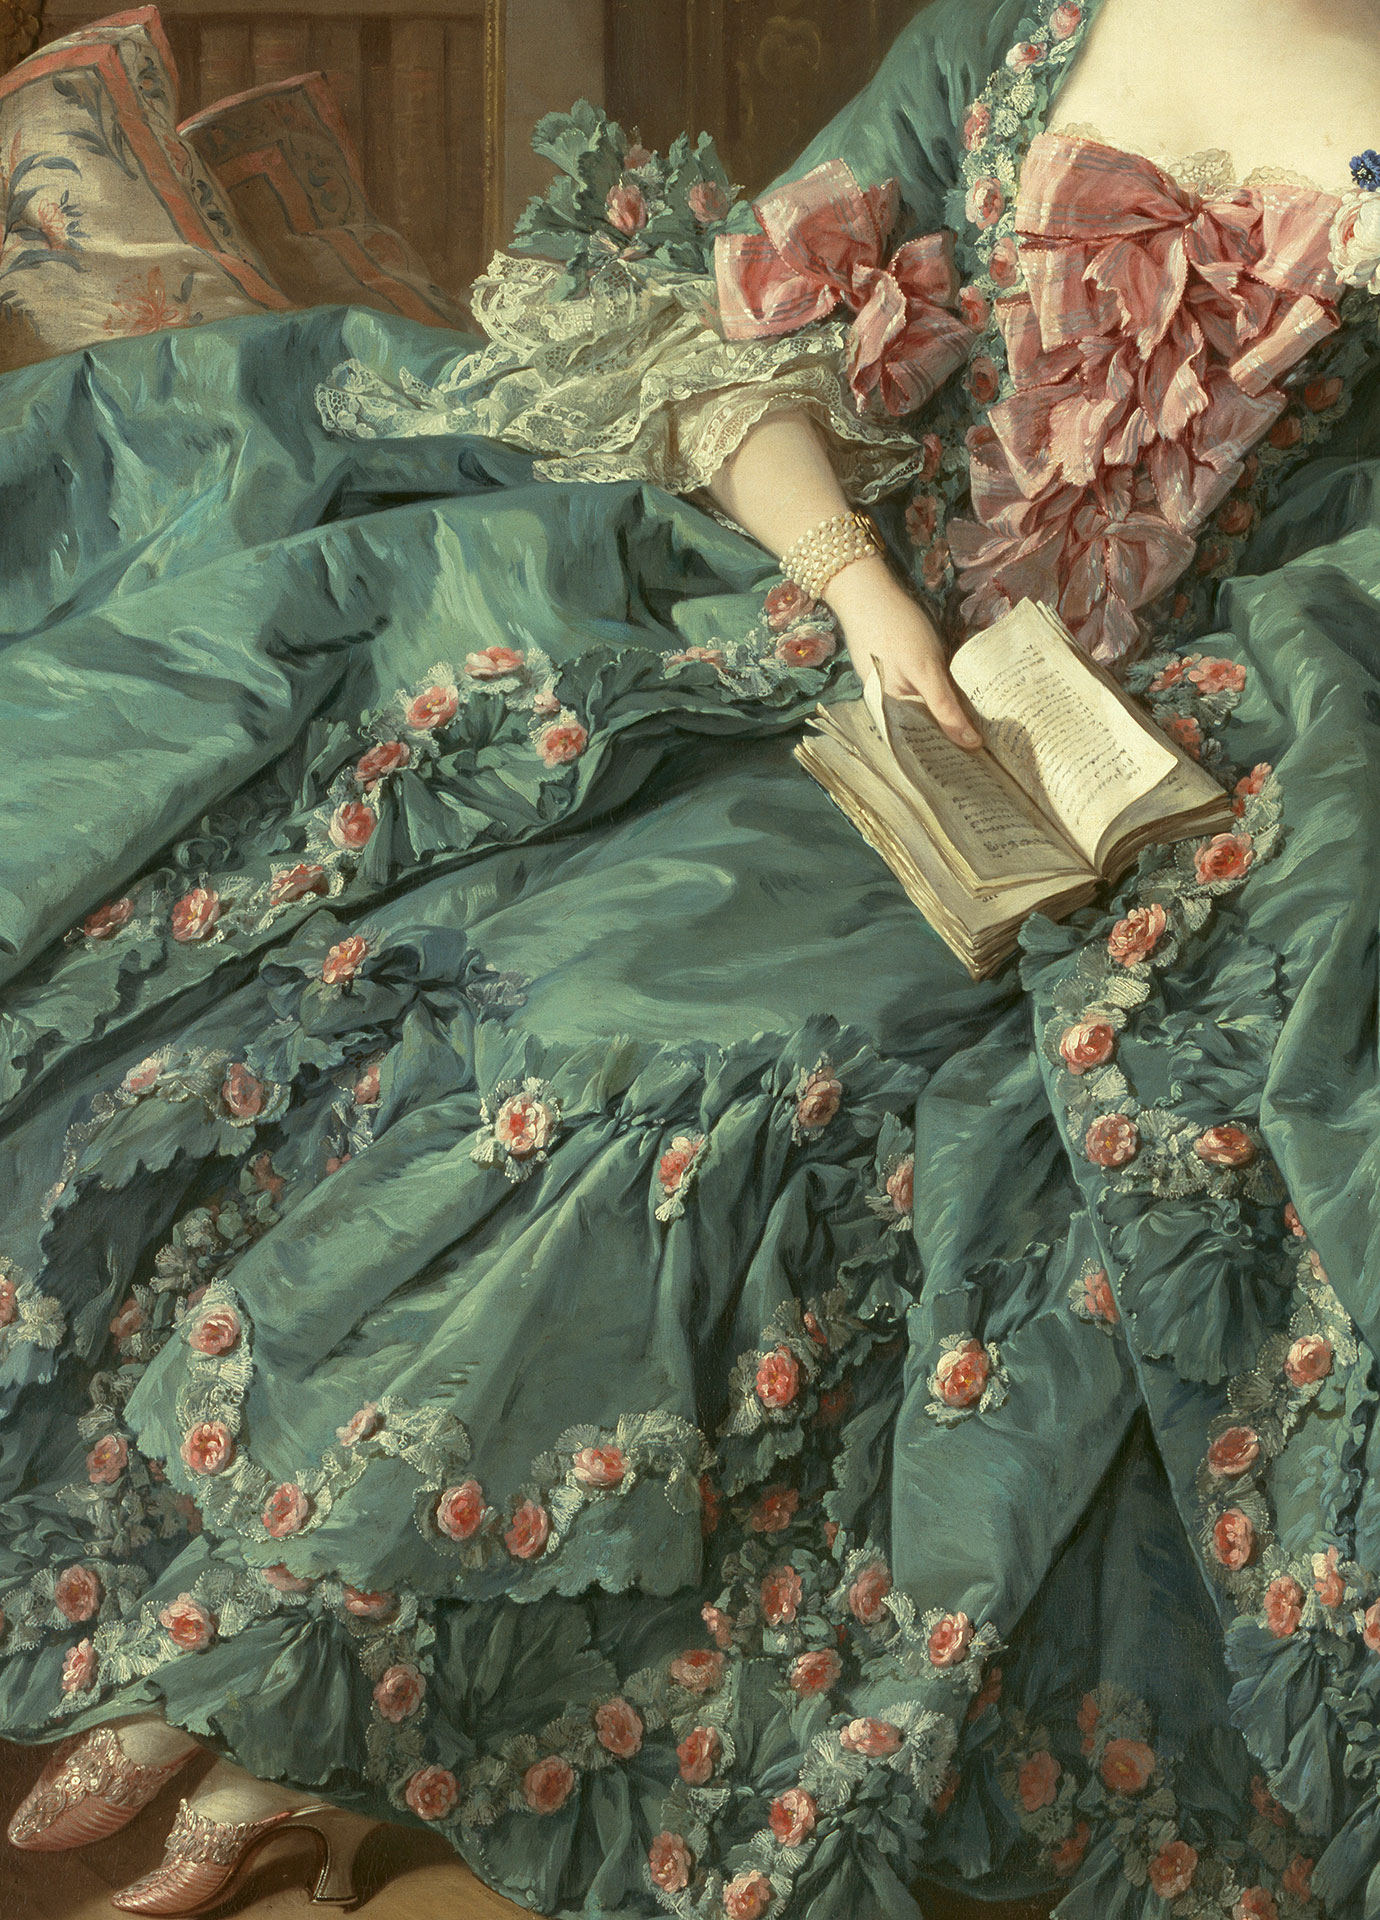 Detail of the painting Portrait of Madame de Pompadour by François Boucher. The cutting lies on the open book in her lap.